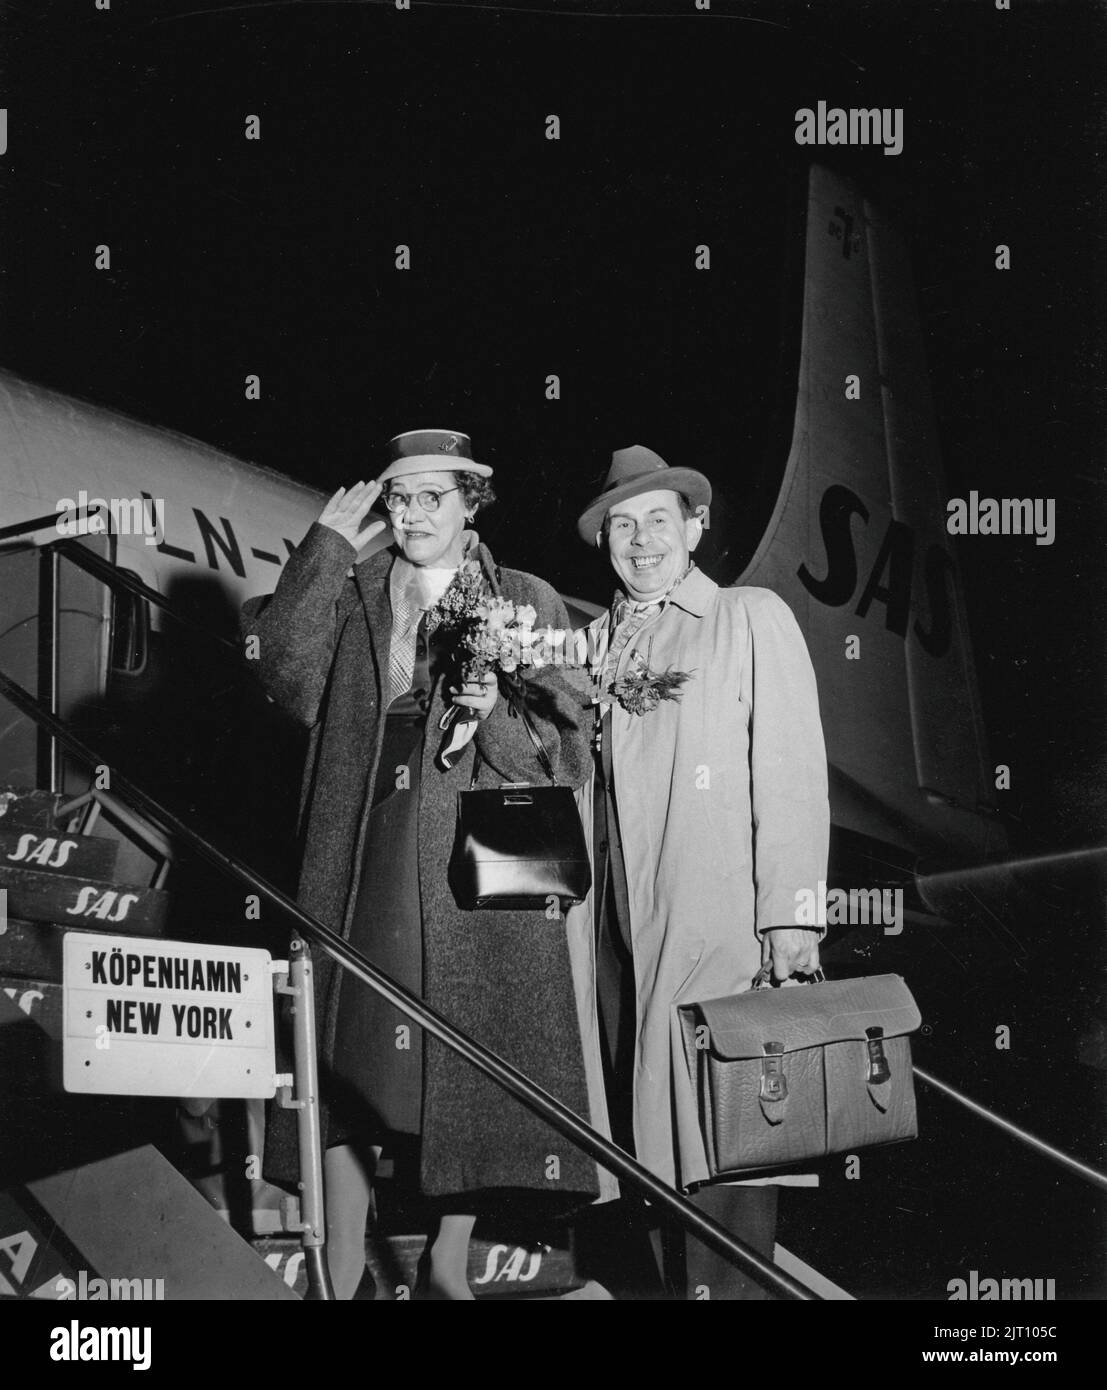 1950s vacation. A couple standing on the stairs before boarding the airplane, waving goodbye, looking happy. On route to New York via Copenhagen. Sweden 1957 Stock Photo